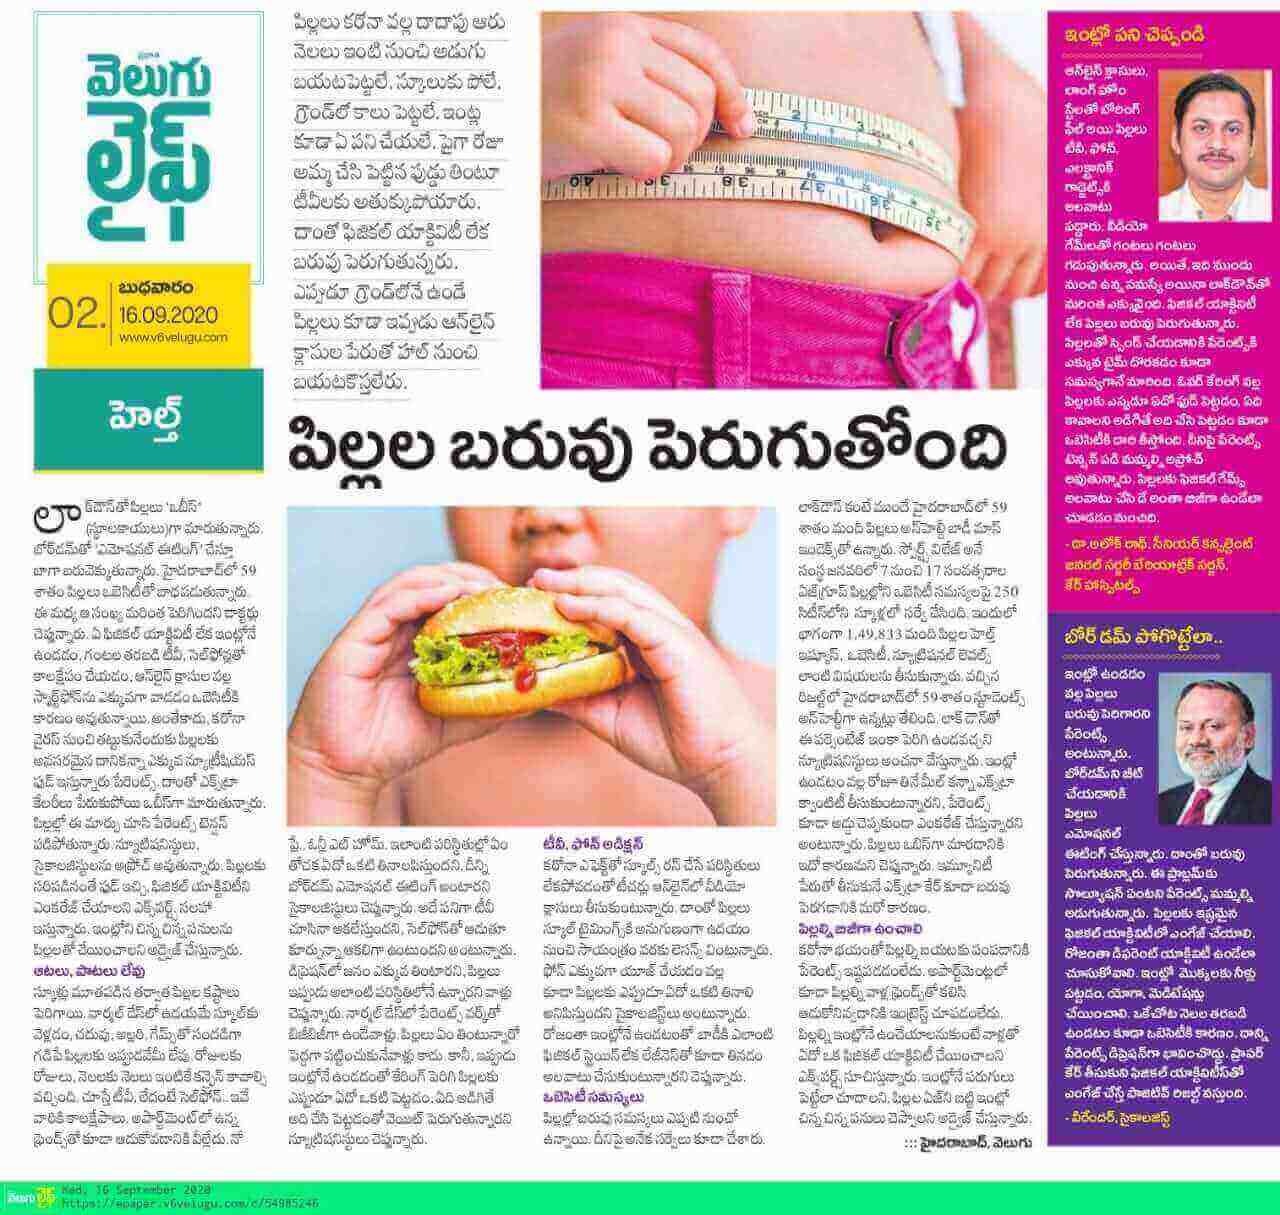 Obesee Problems in Children Due to Emotinal Eating Article by Dr. Alok Rath Sr. Consultant General Surgeon